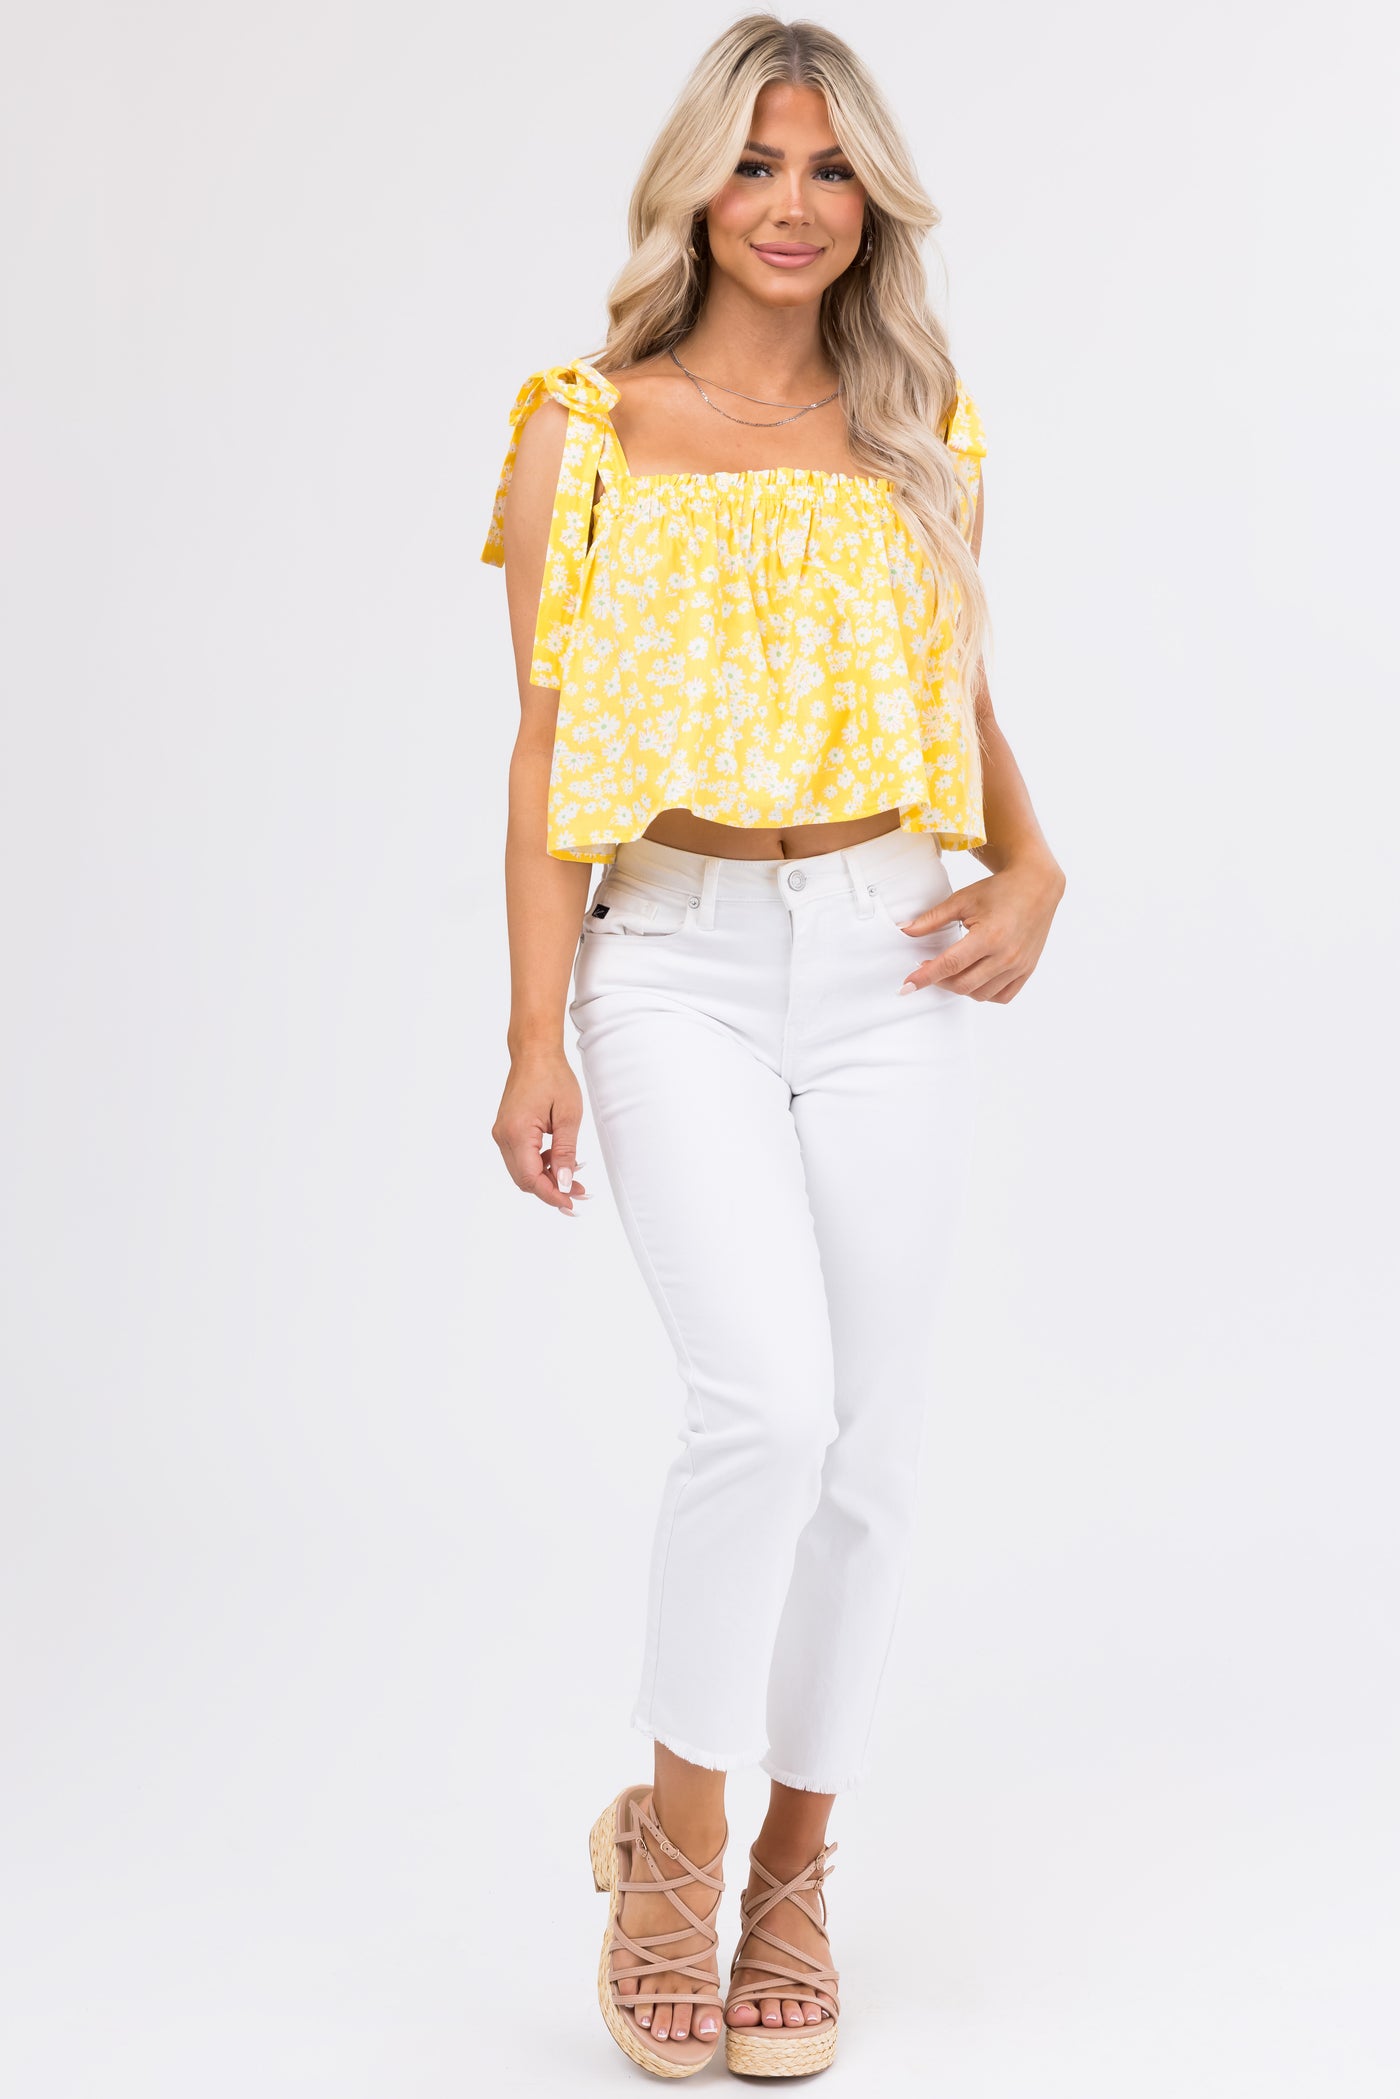 Canary Yellow Ditsy Floral Shoulder Tie Top